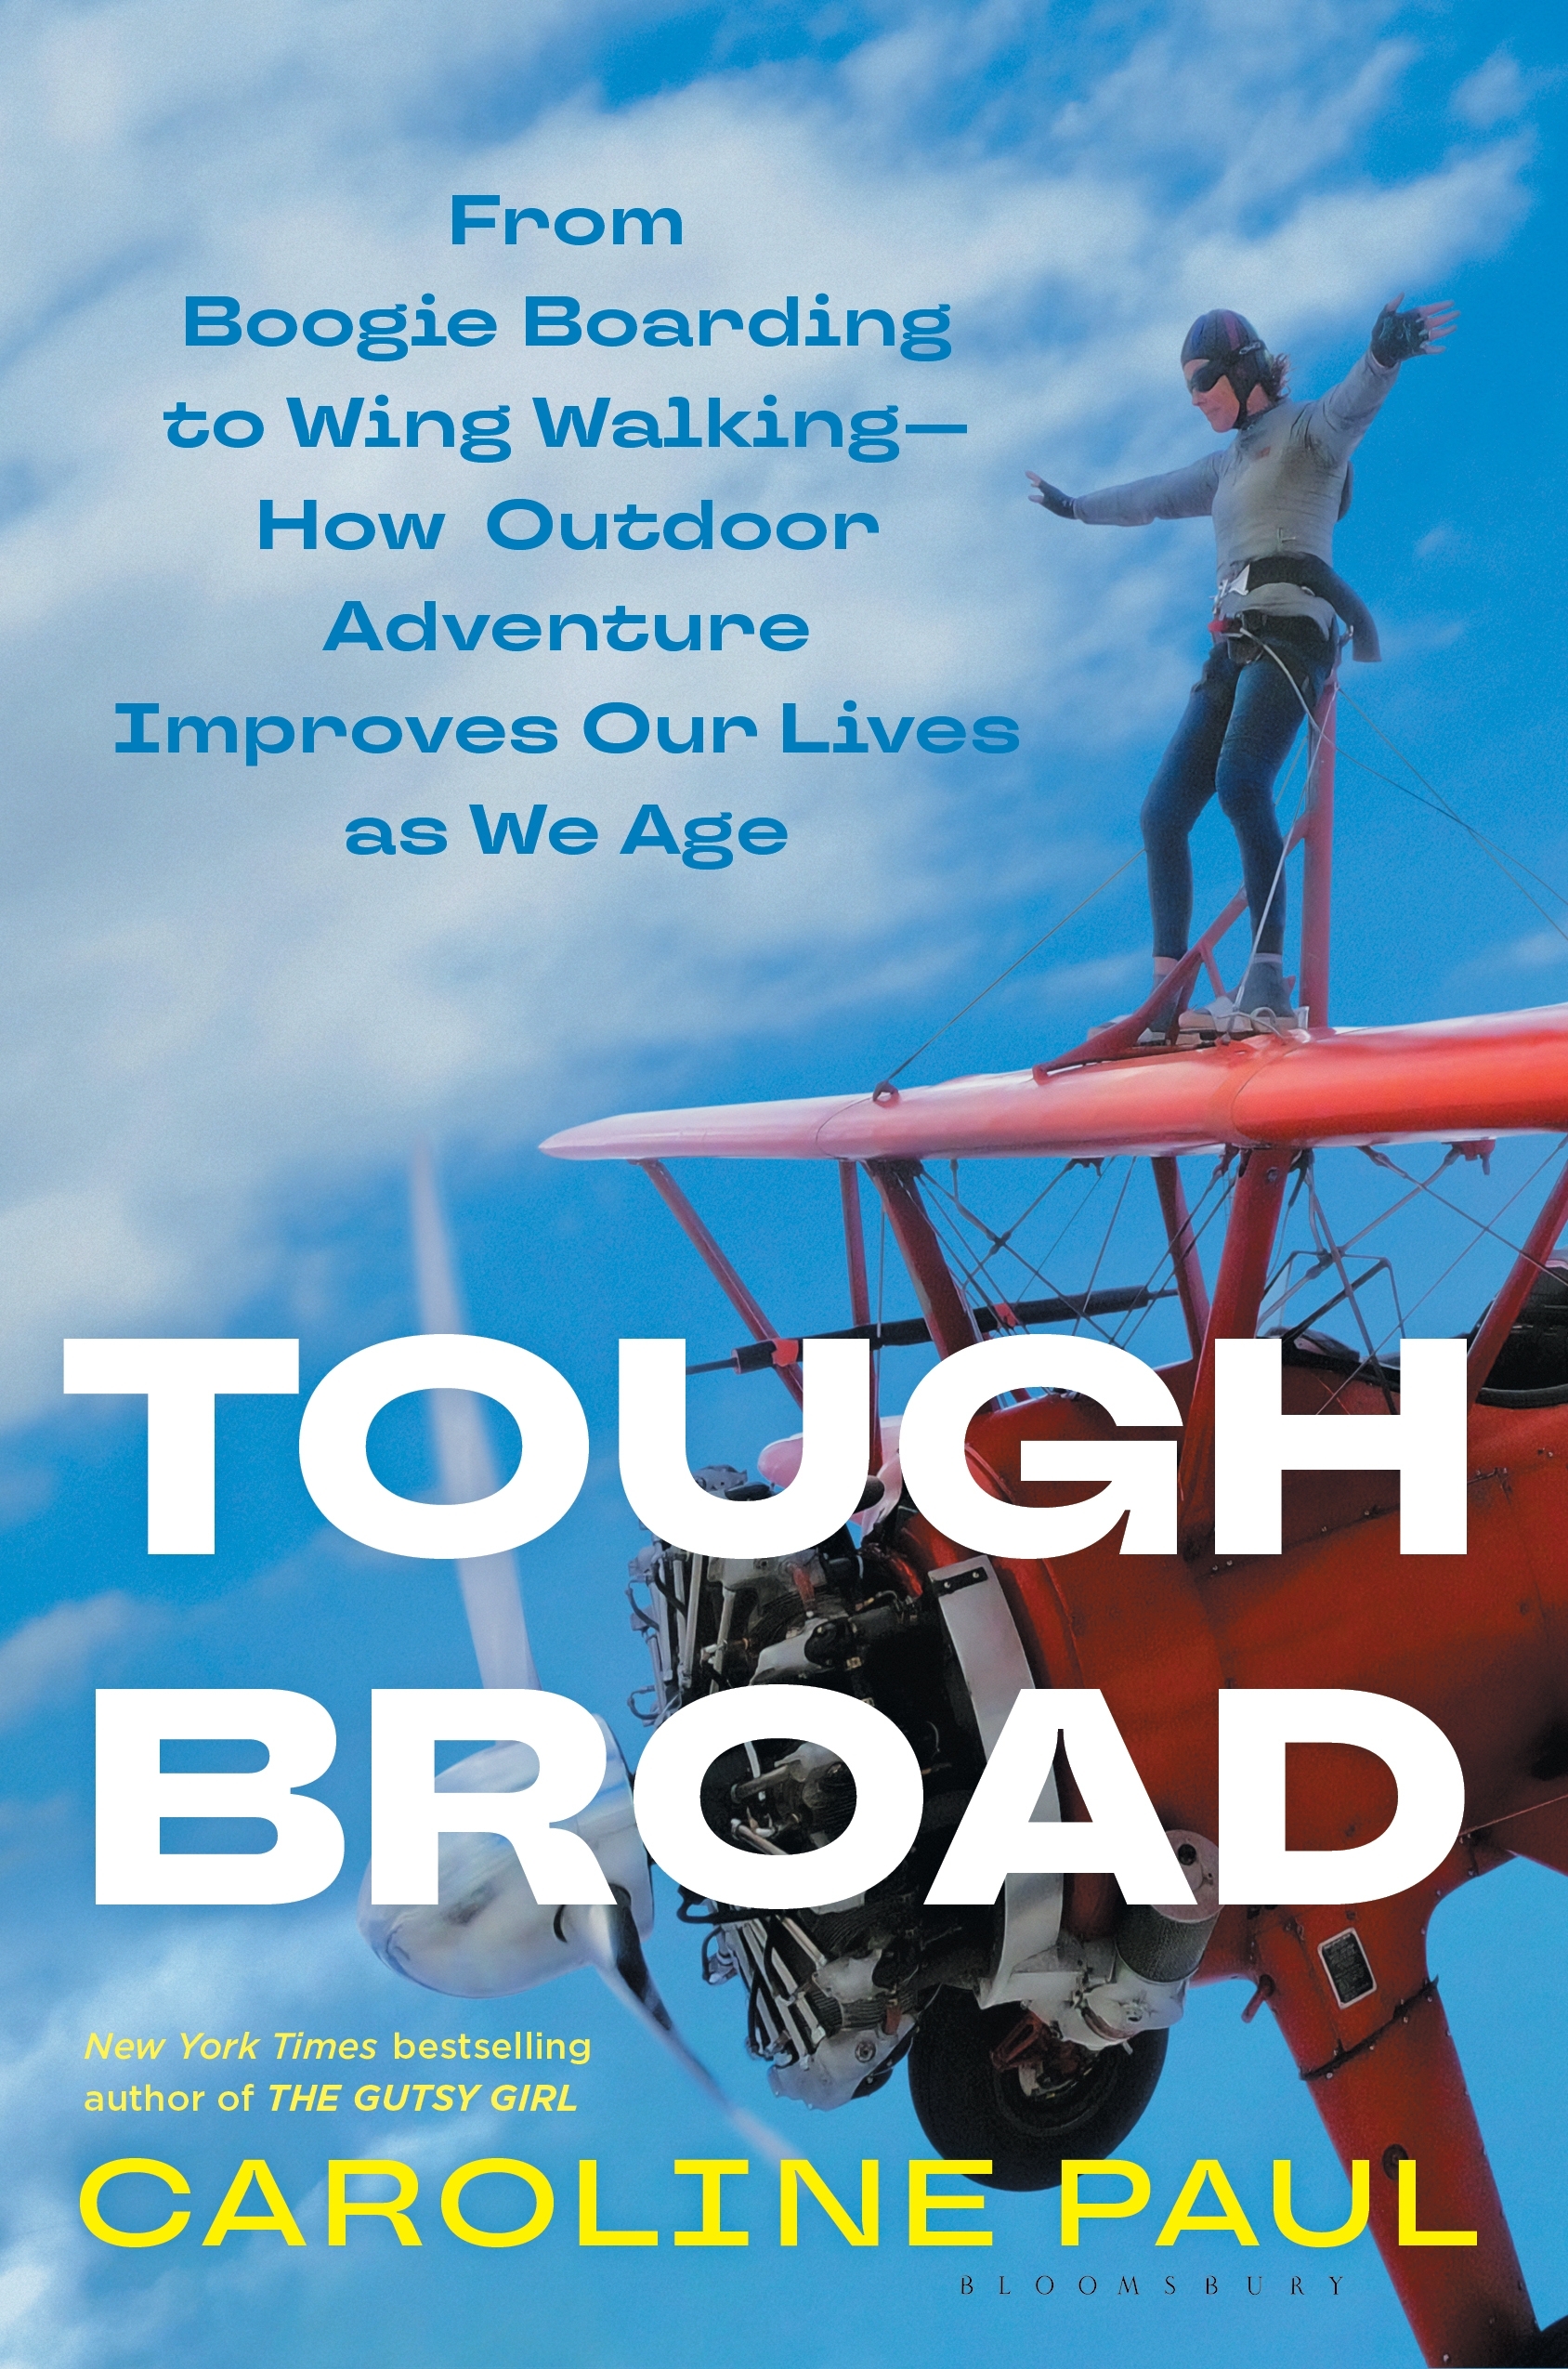 One of our recommended books is Tough Broad by Caroline Paul